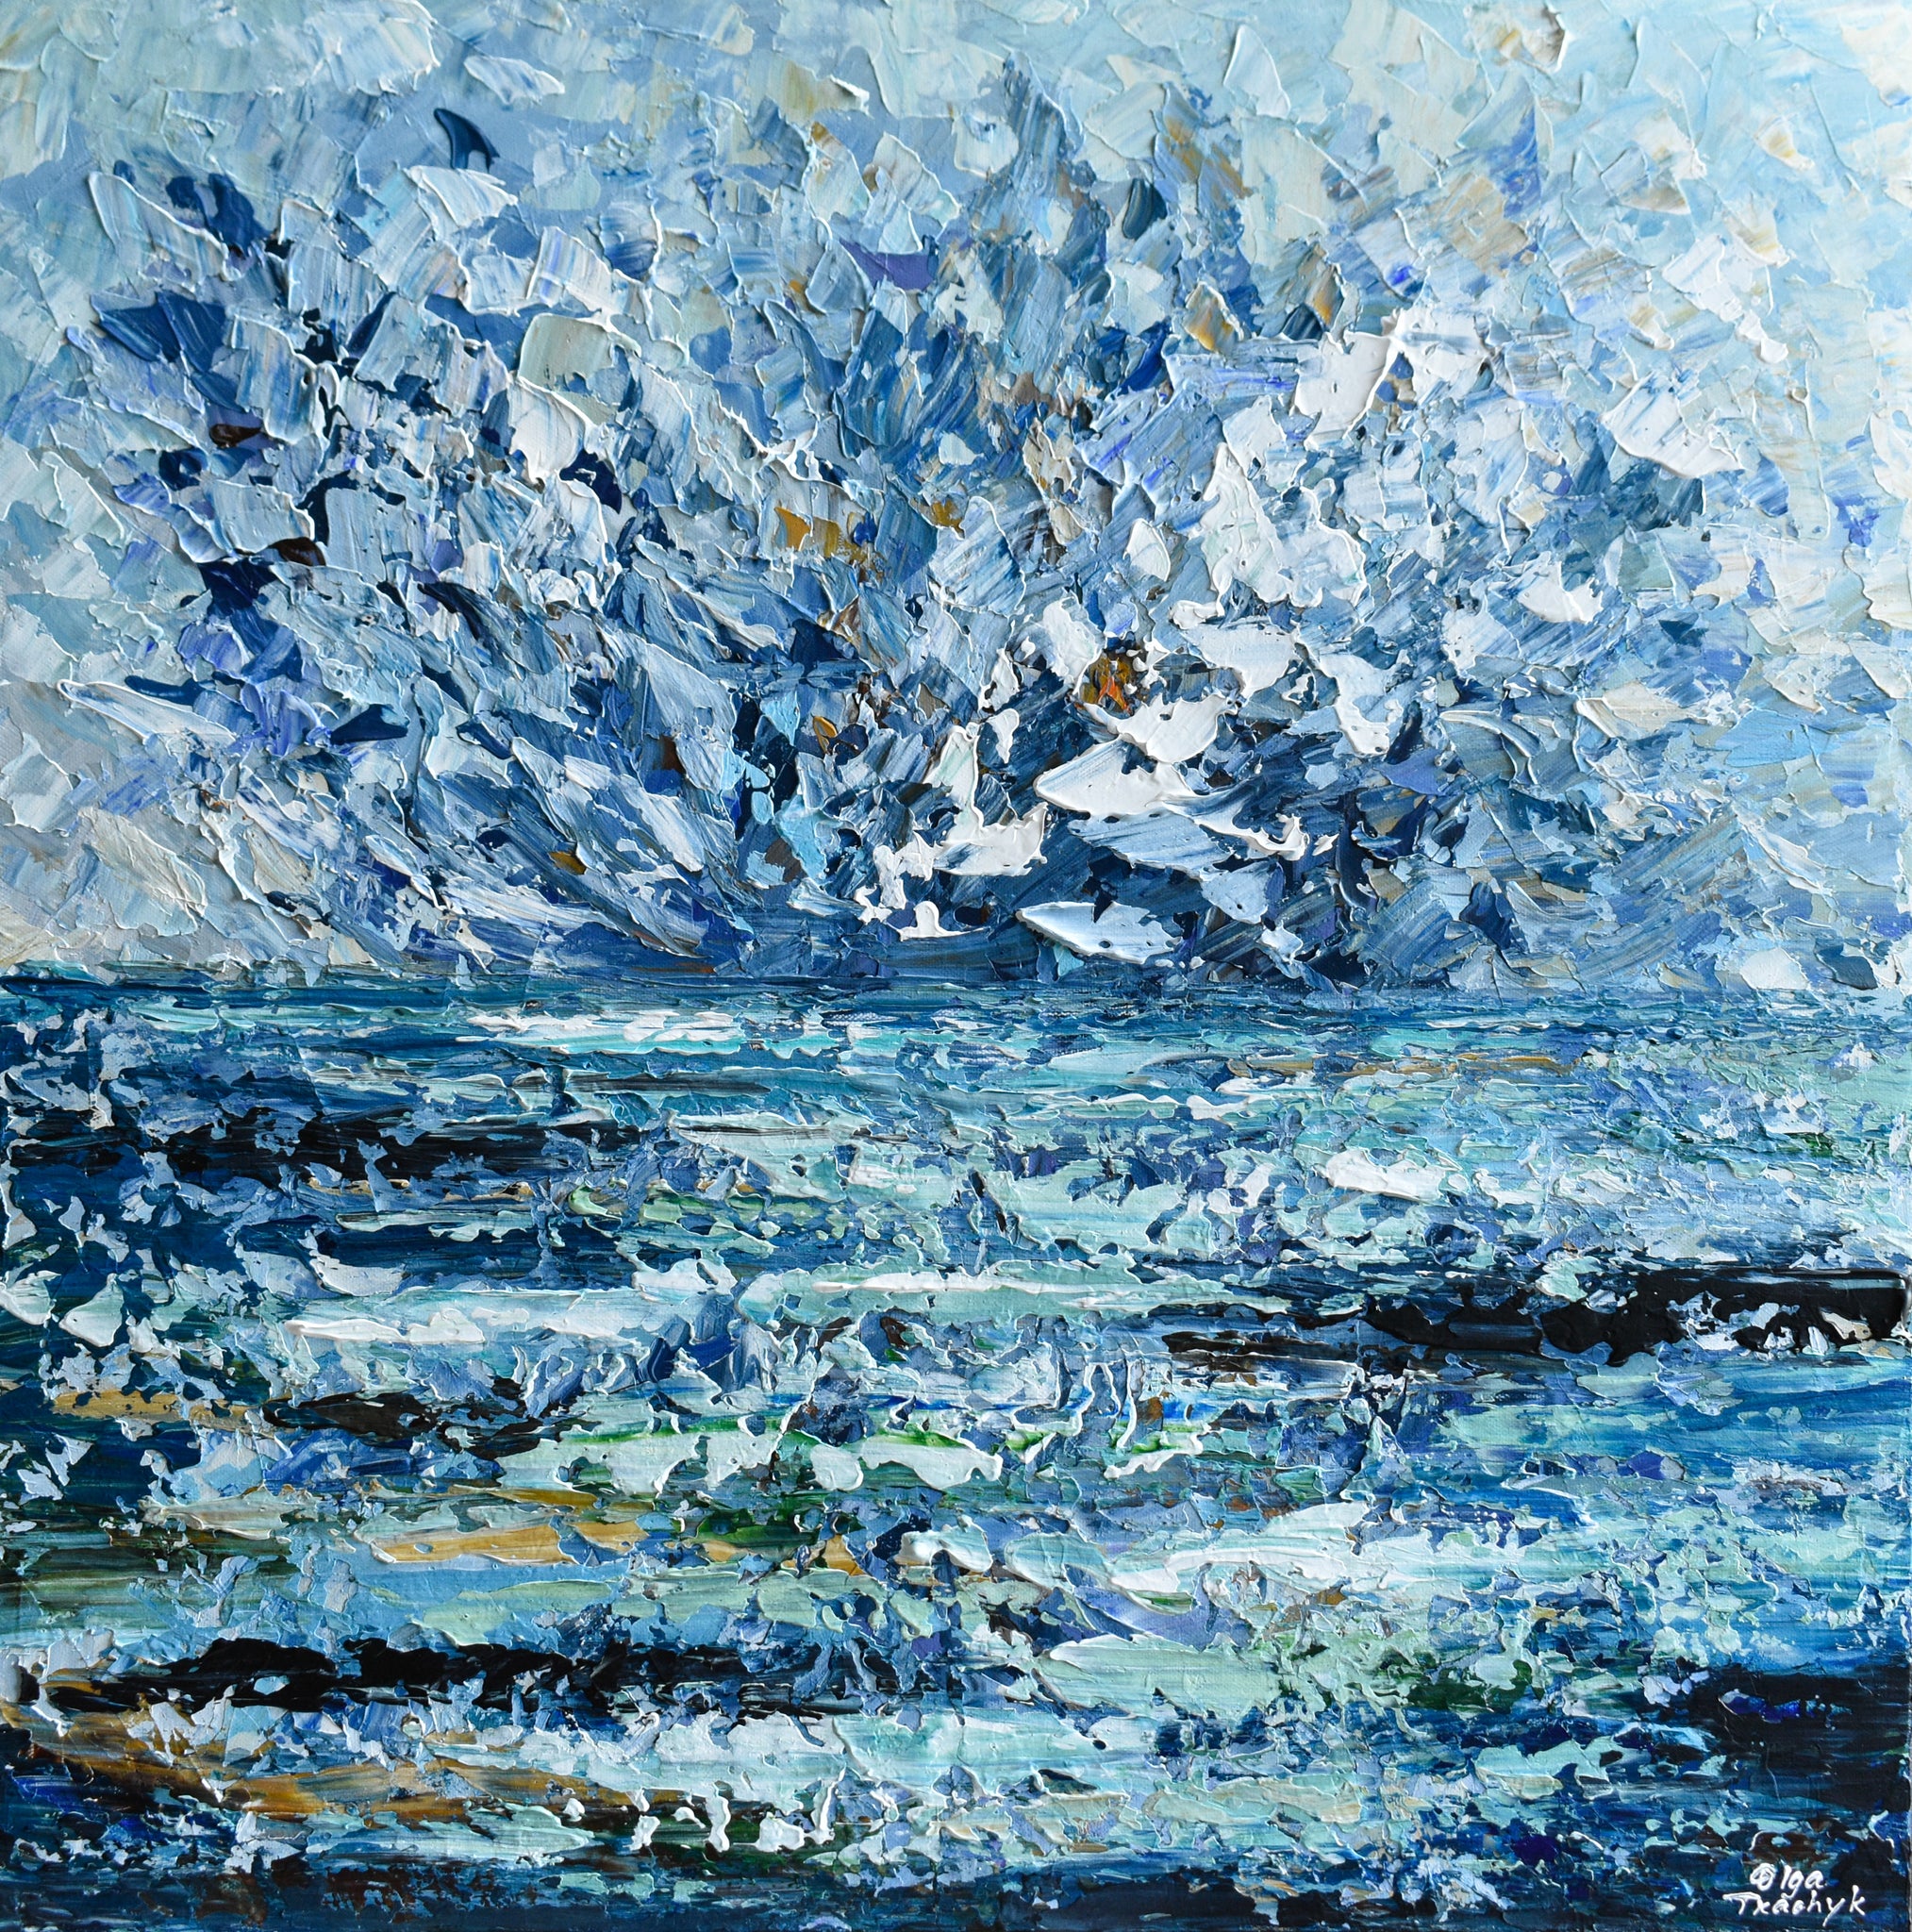 Seascape painting, ocean after the storm, palette knife textured wall art, acrylic on canvas